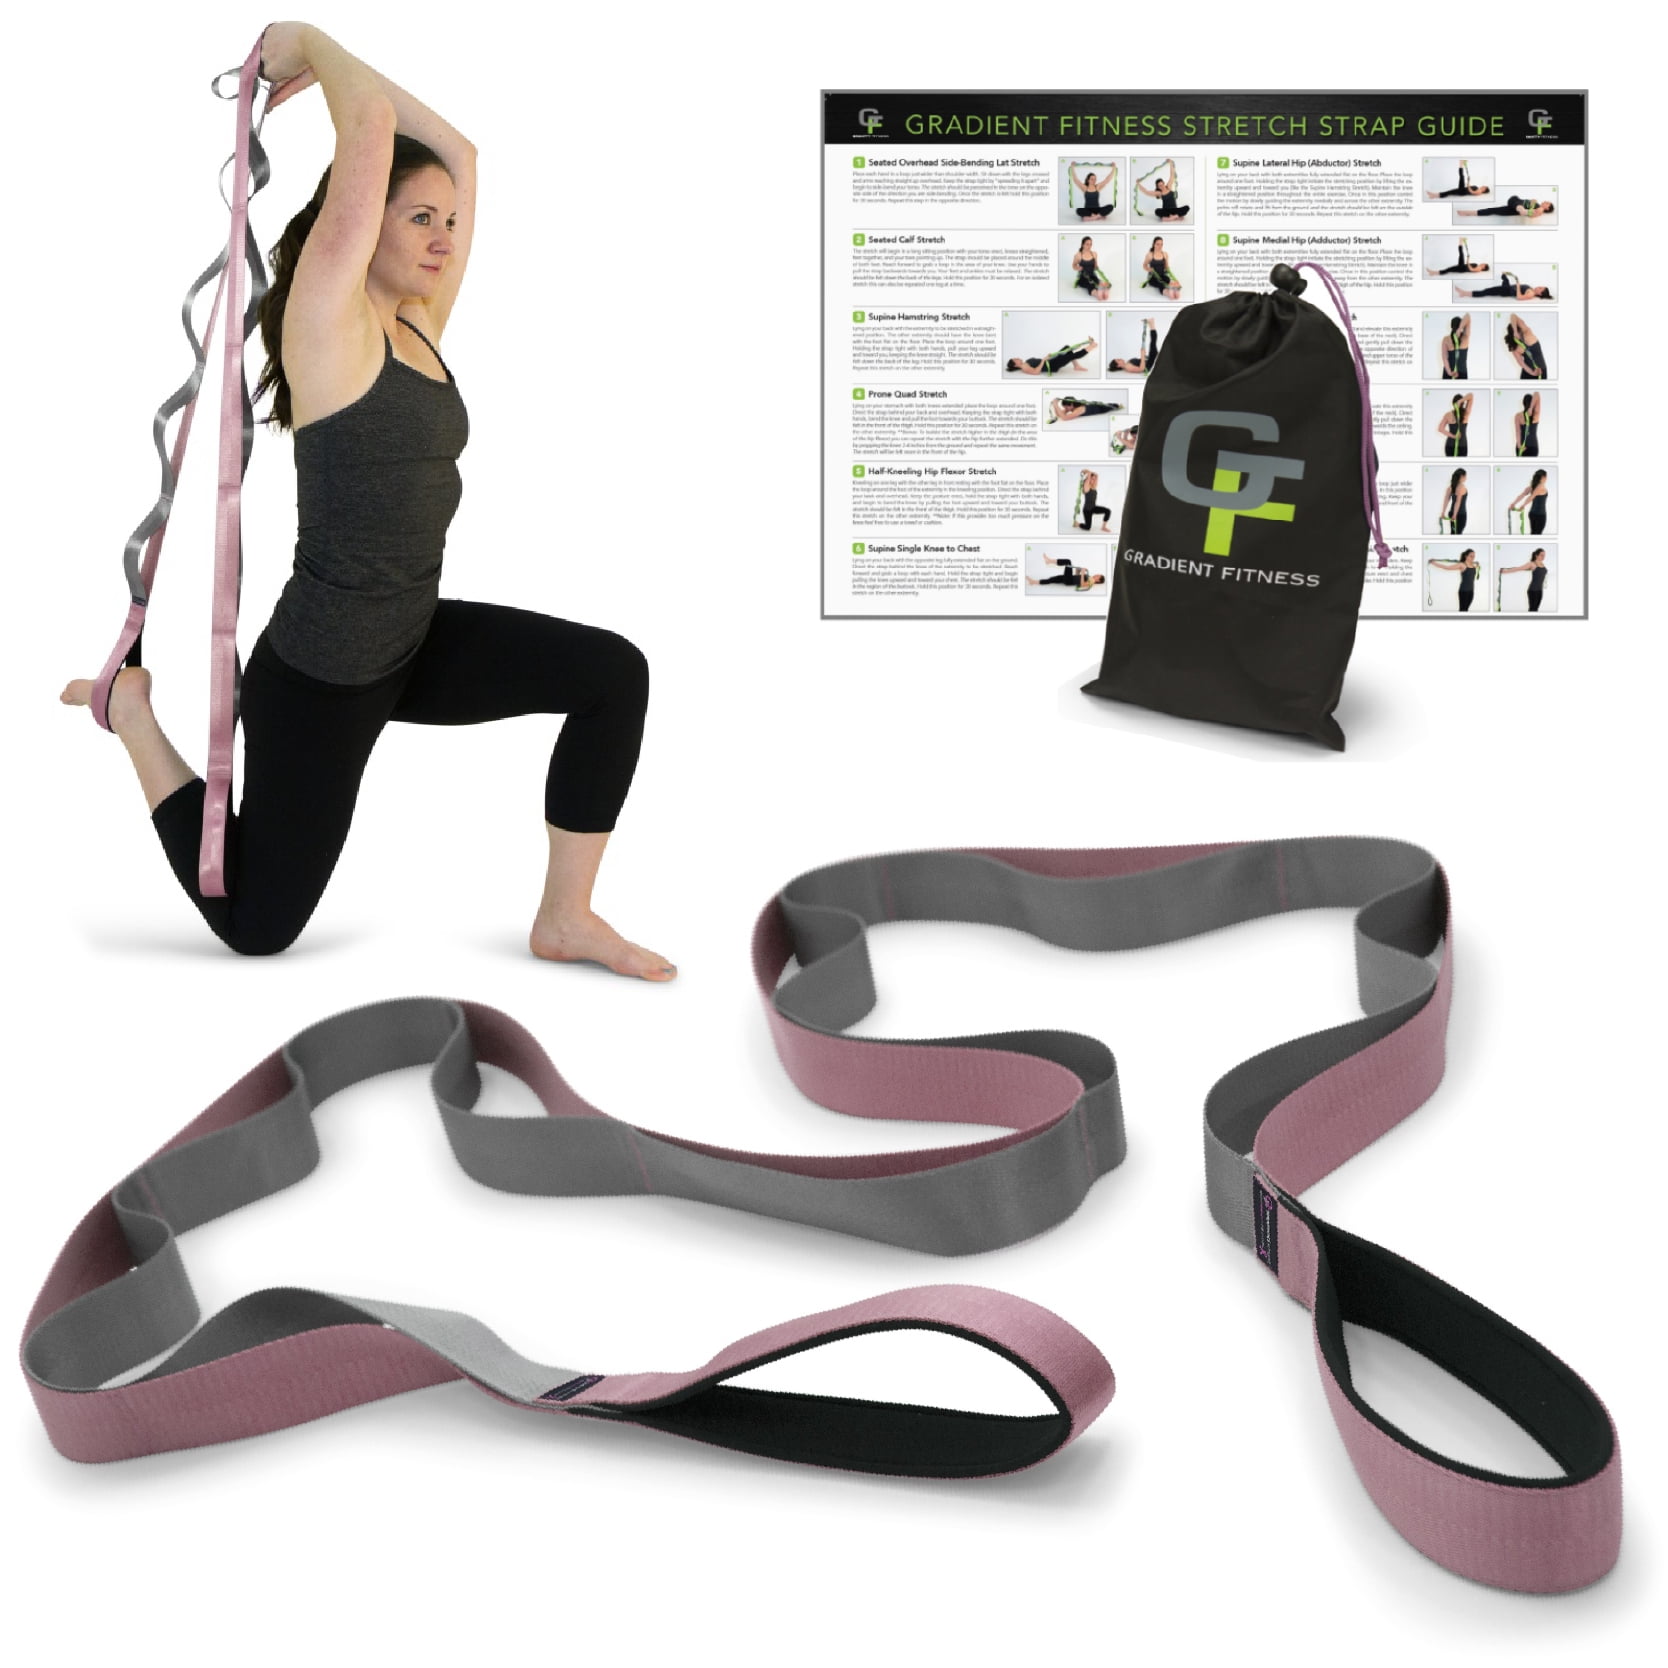 Gradient Fitness Stretching Strap for Physical Therapy, 12 Multi-Loop  Stretch Strap 1 W x 8' L, Neoprene Handles, Physical Therapy Equipment,  Yoga Straps for Stretching, Leg Stretcher Green/Gray